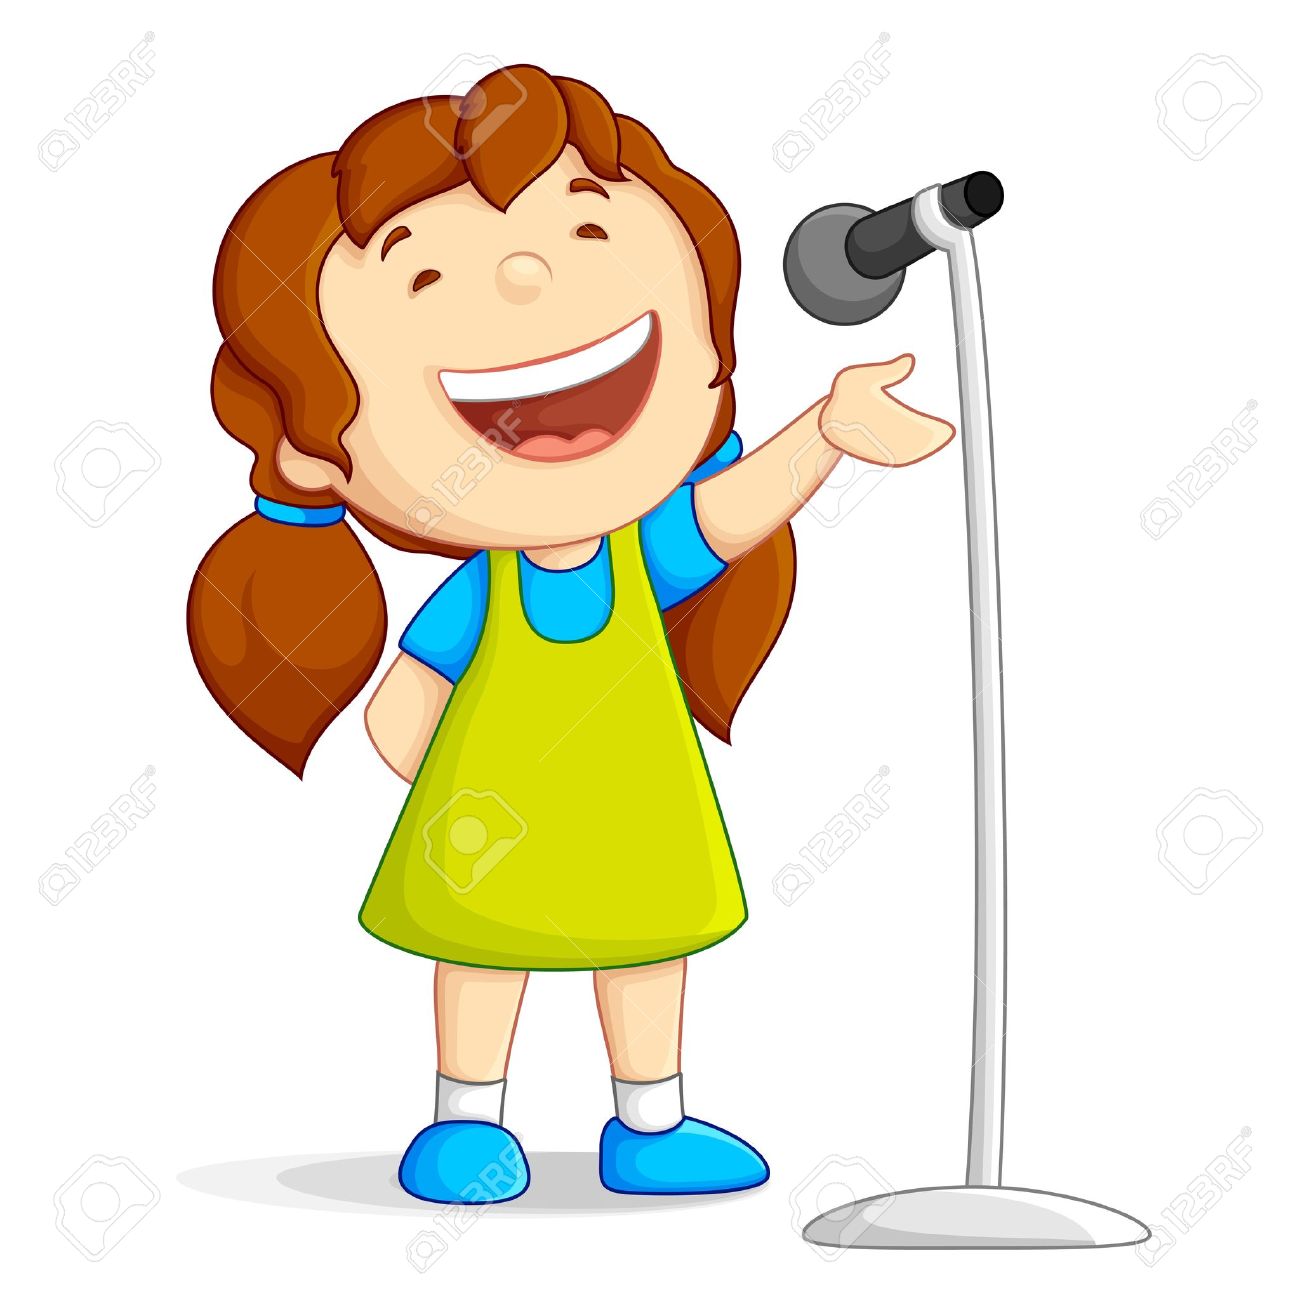 sing clipart singing clipart 